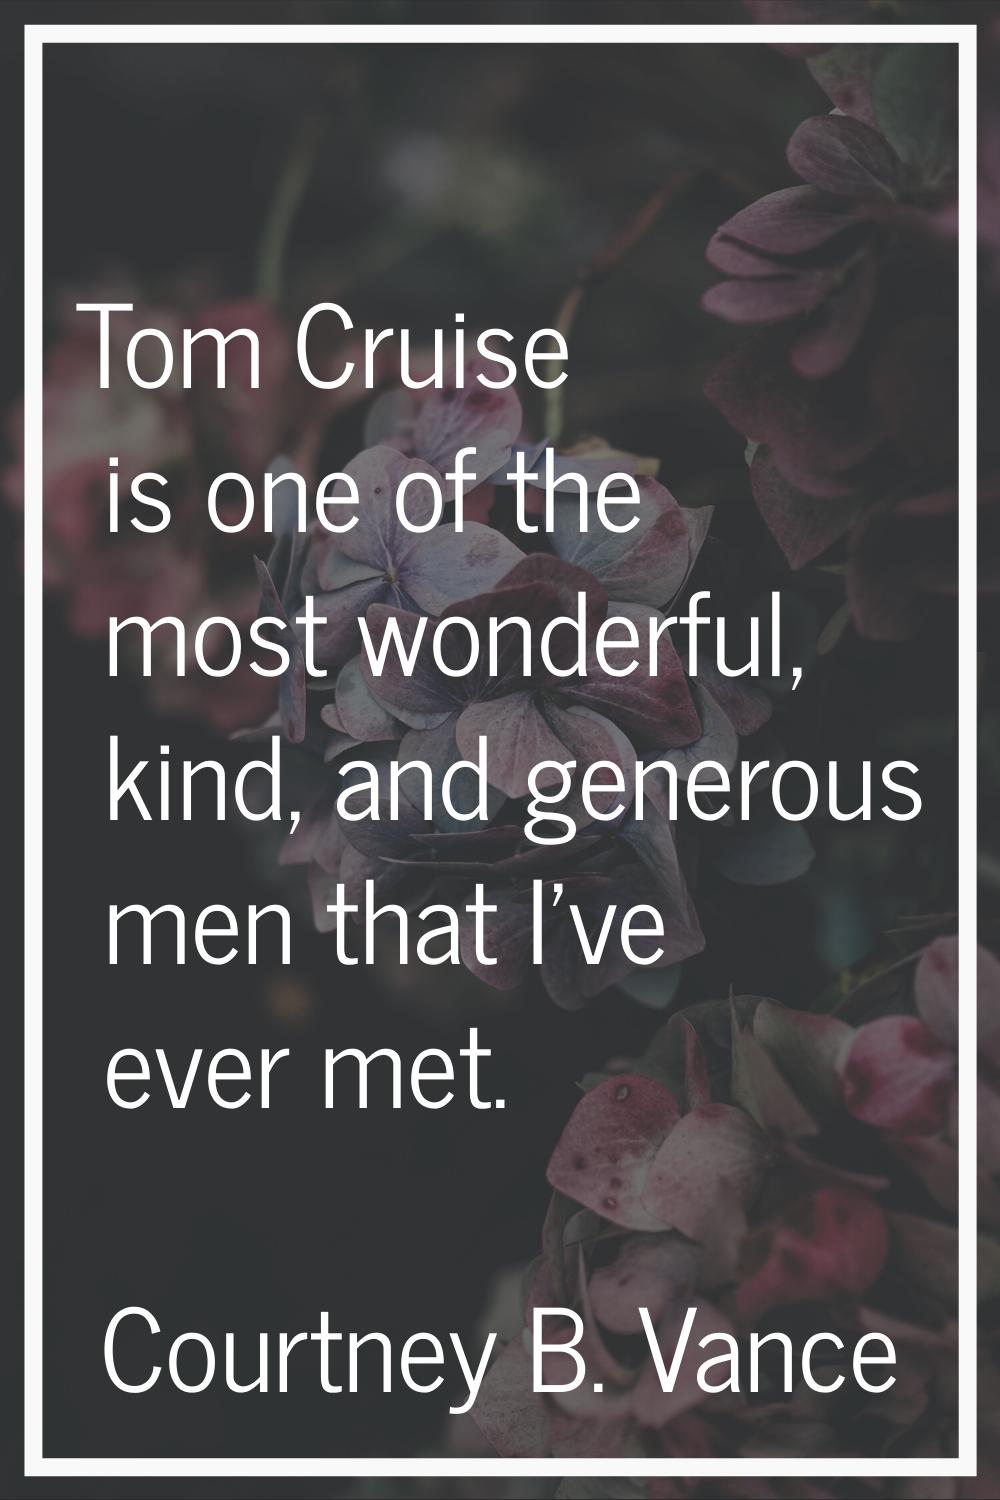 Tom Cruise is one of the most wonderful, kind, and generous men that I've ever met.